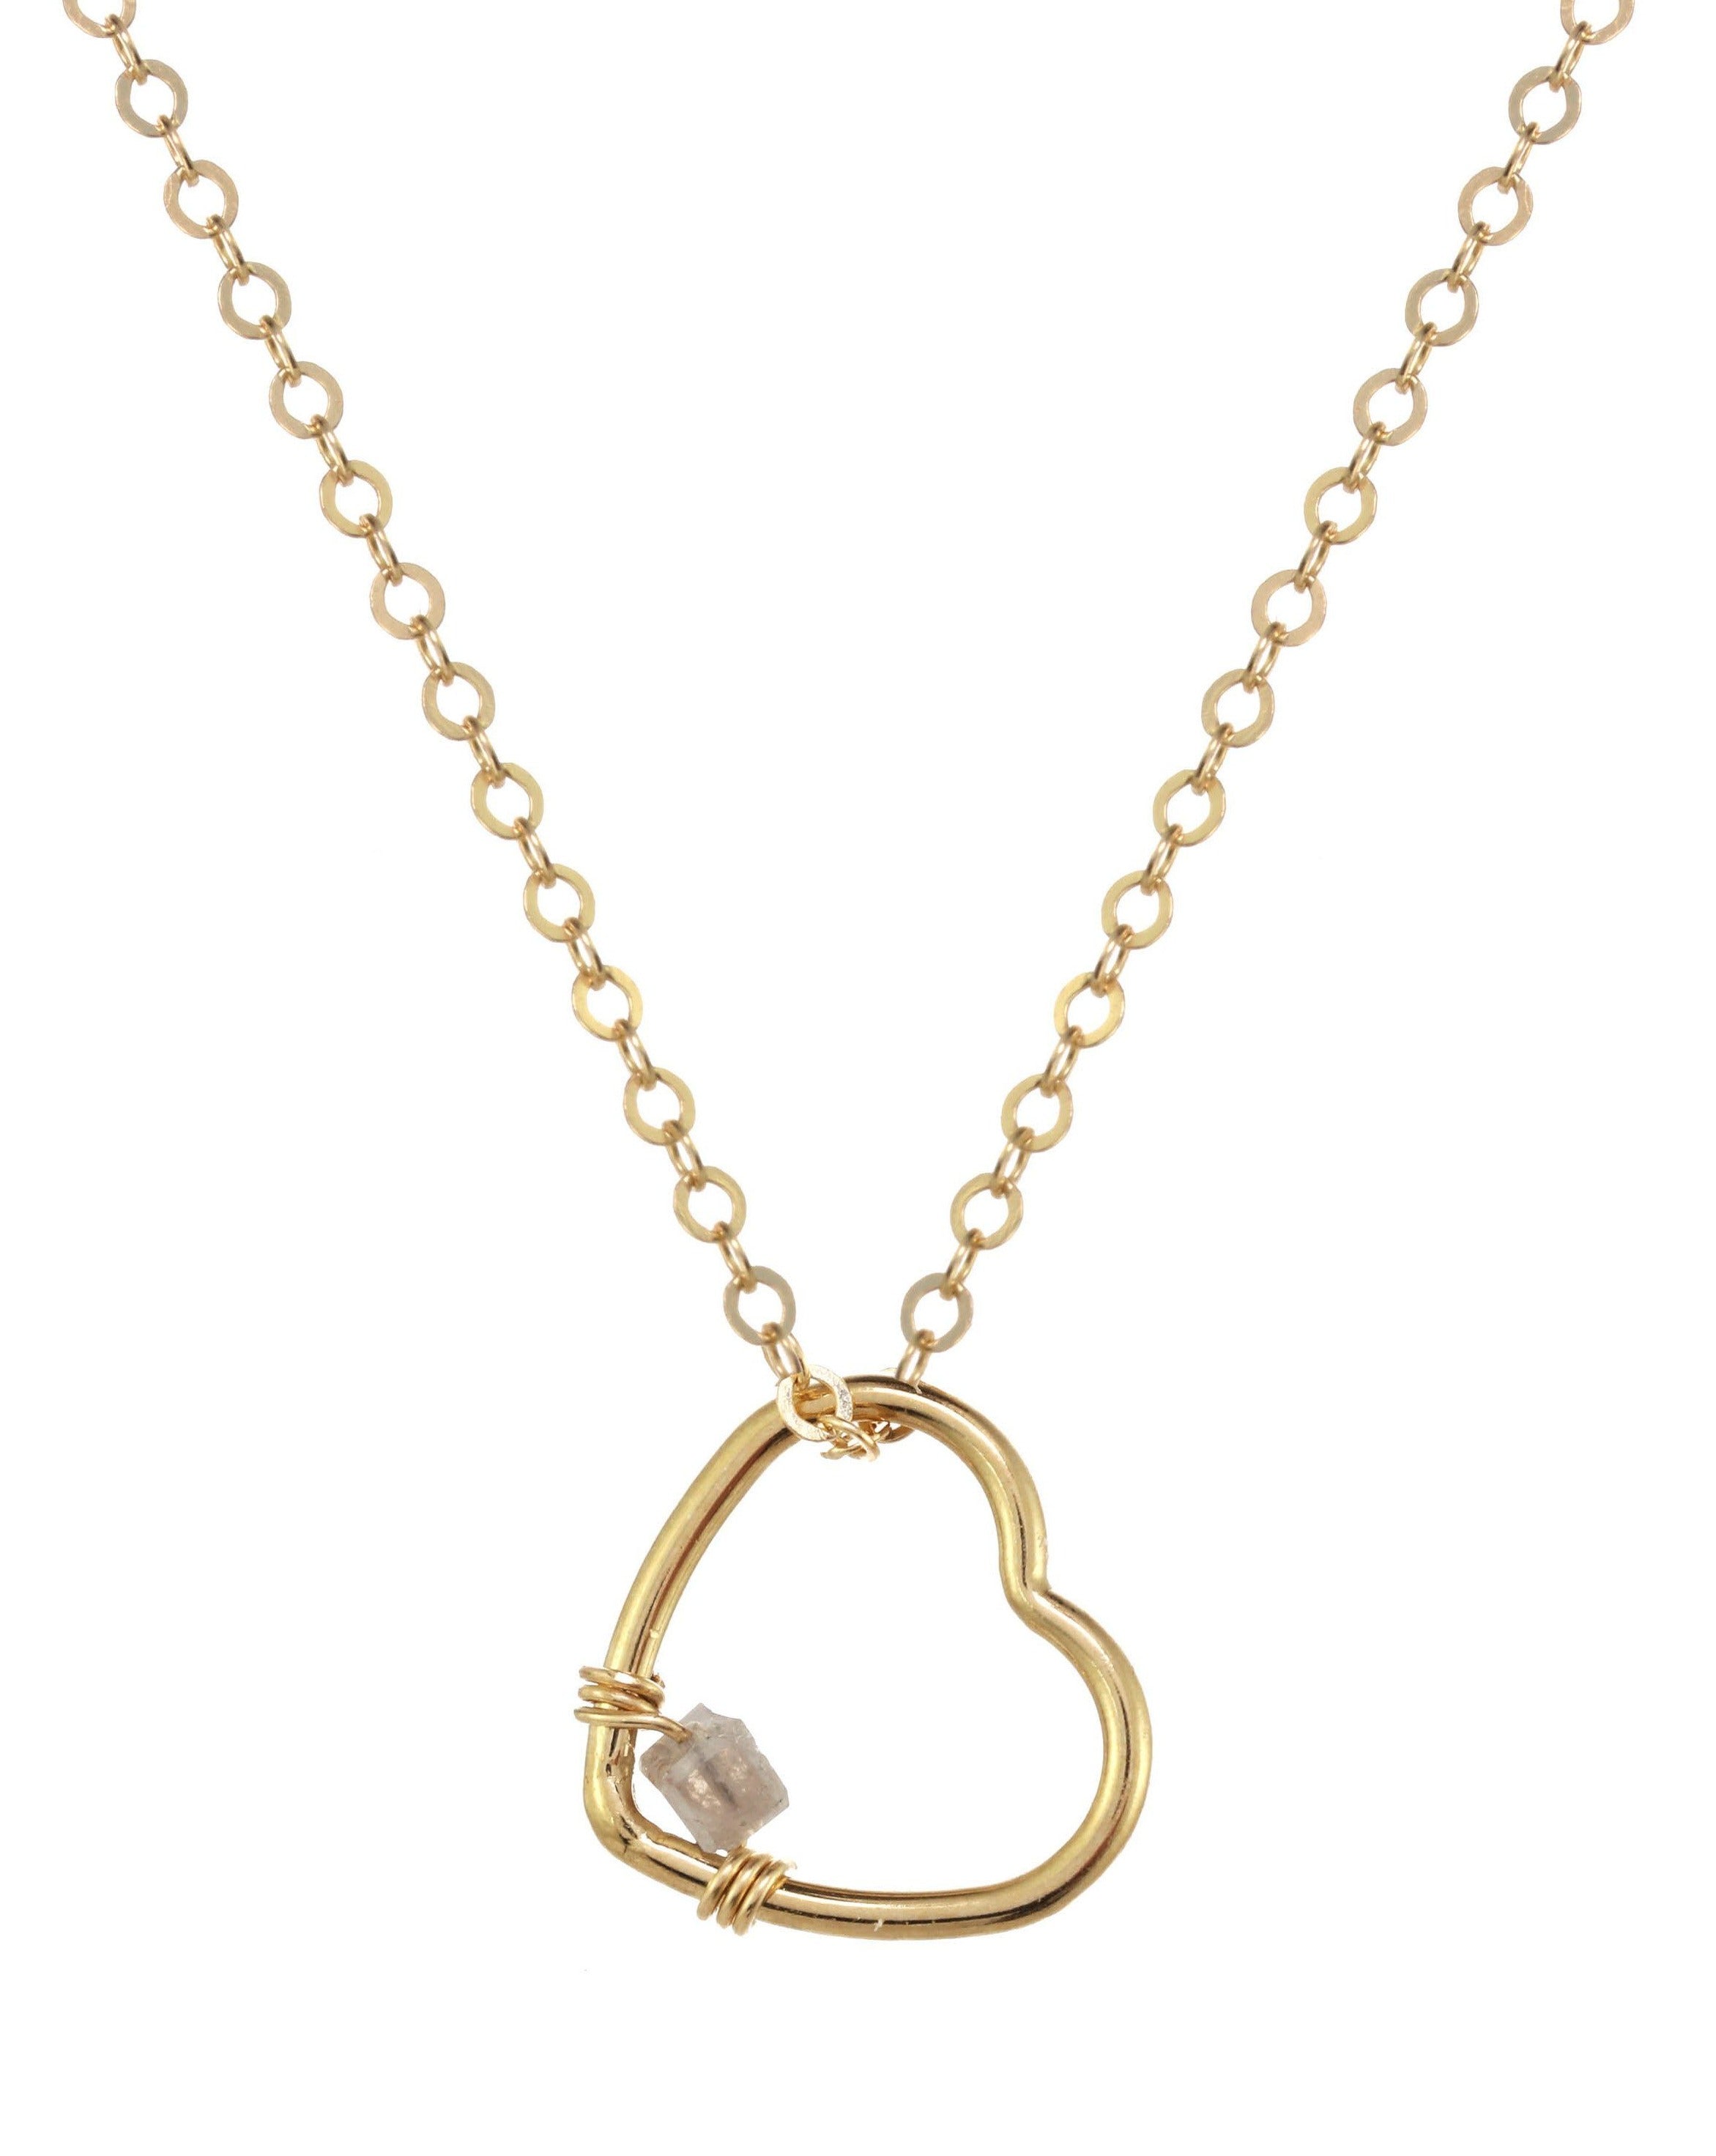 Amorcito Necklace by KOZAKH. A 16 to 18 inch adjustable length necklace in 14K Gold Filled, featuring a heart shaped charm with a square cut Grey Diamond.